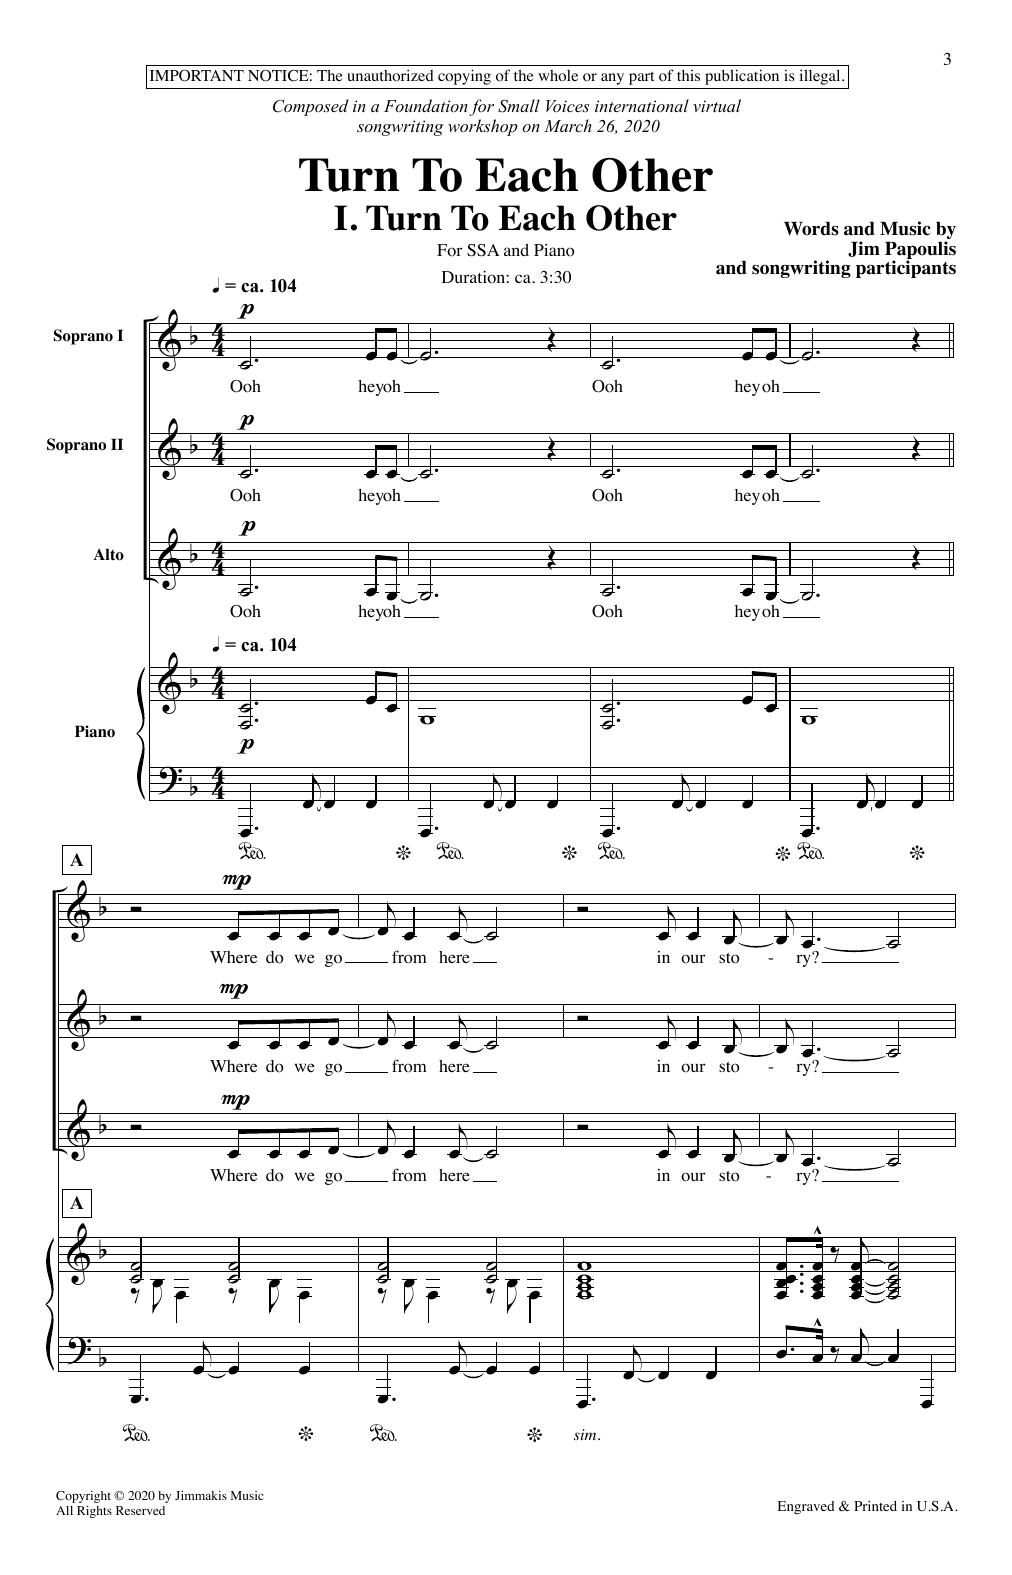 Download Jim Papoulis Turn To Each Other Sheet Music